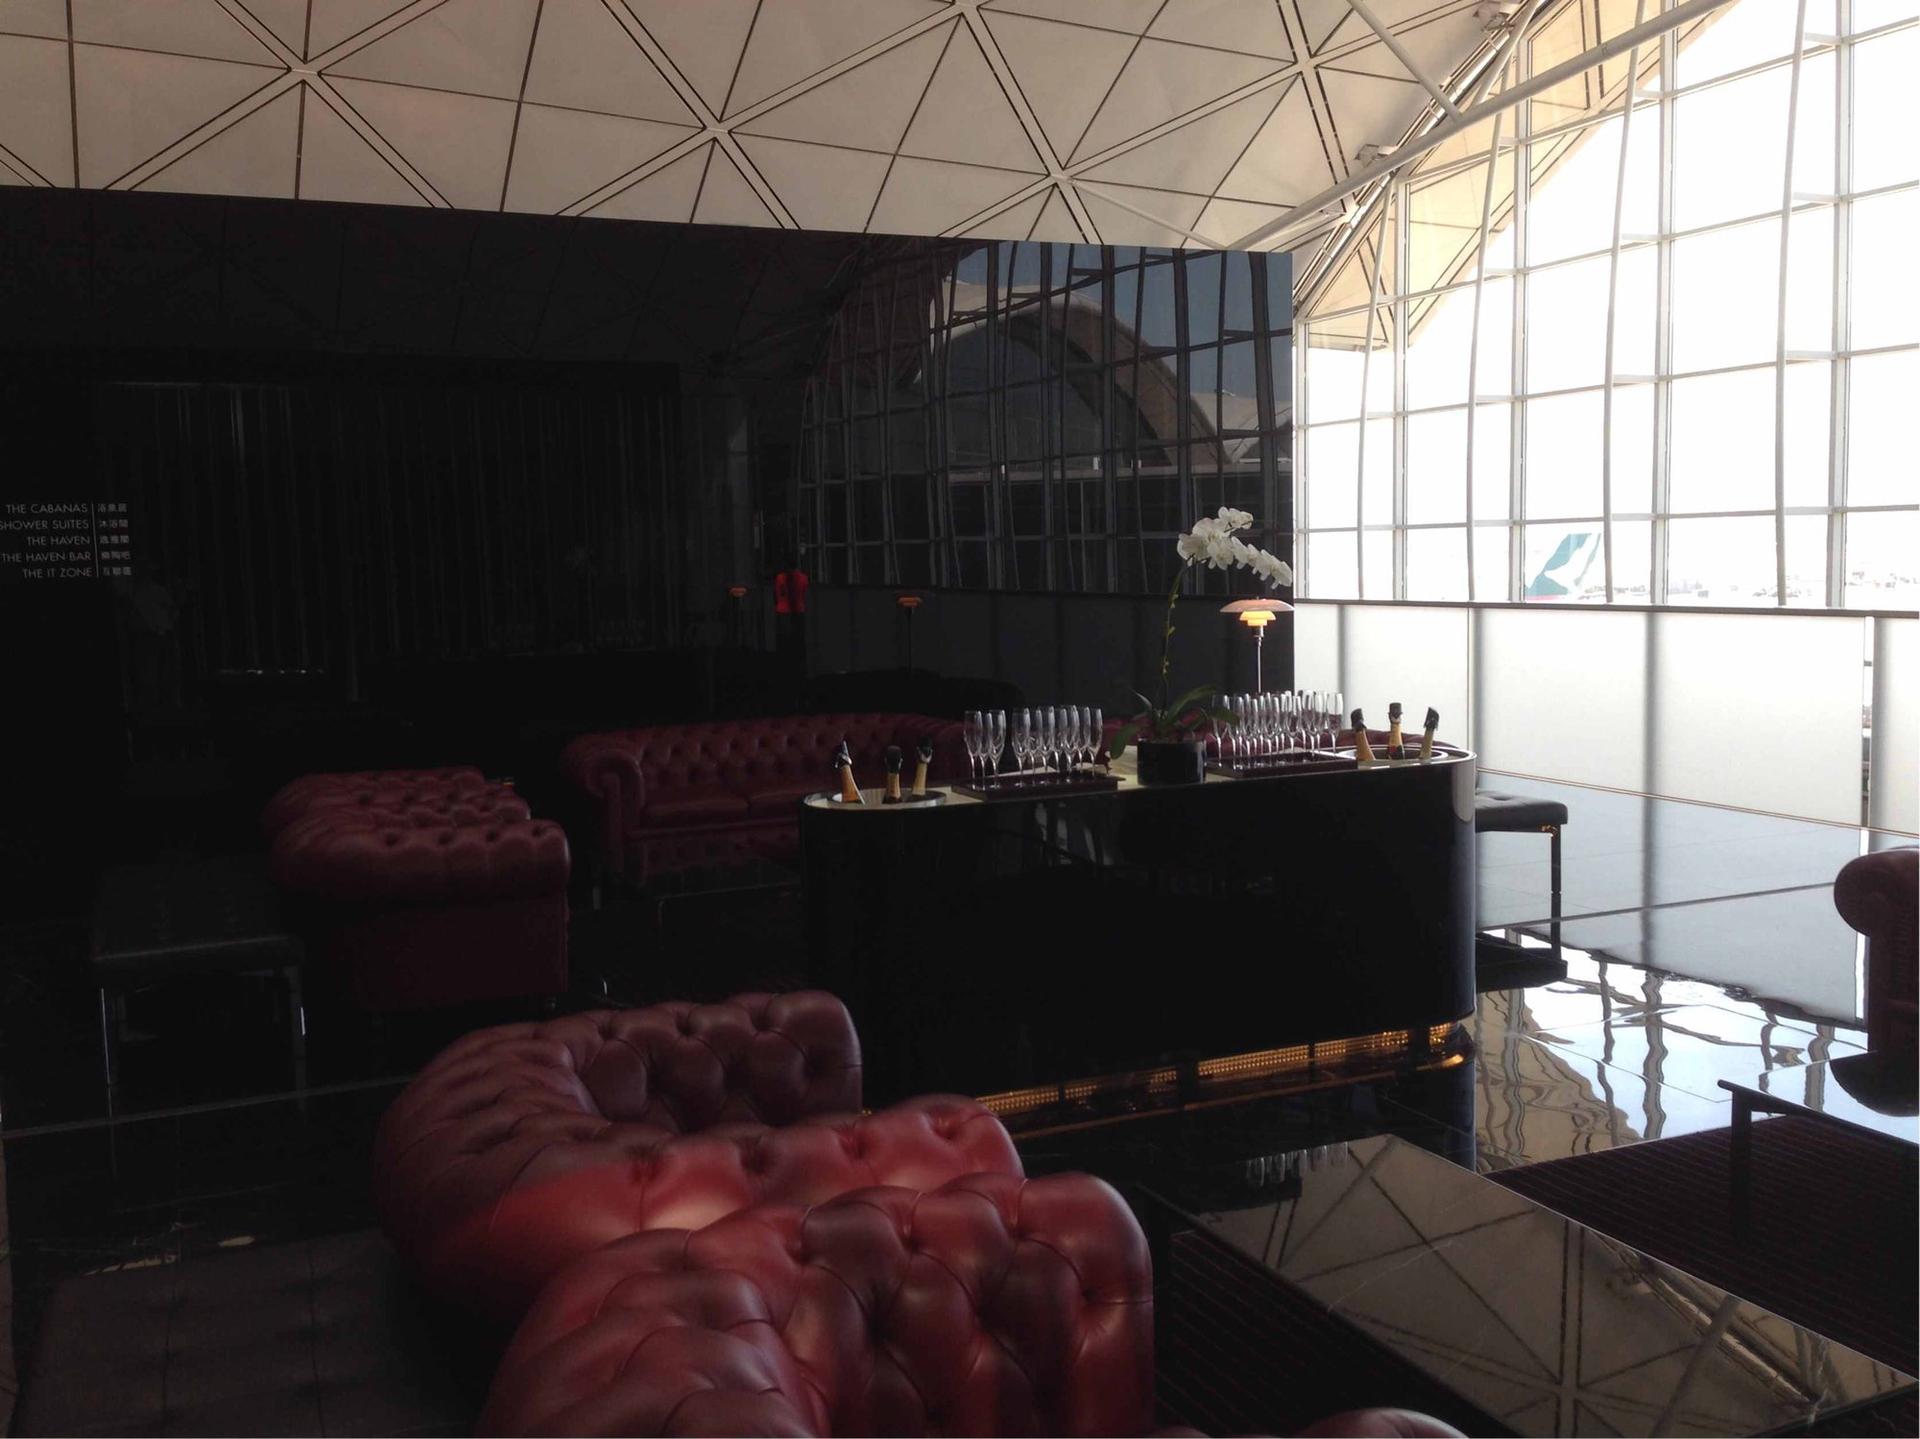 Cathay Pacific The Wing First Class Lounge image 58 of 89